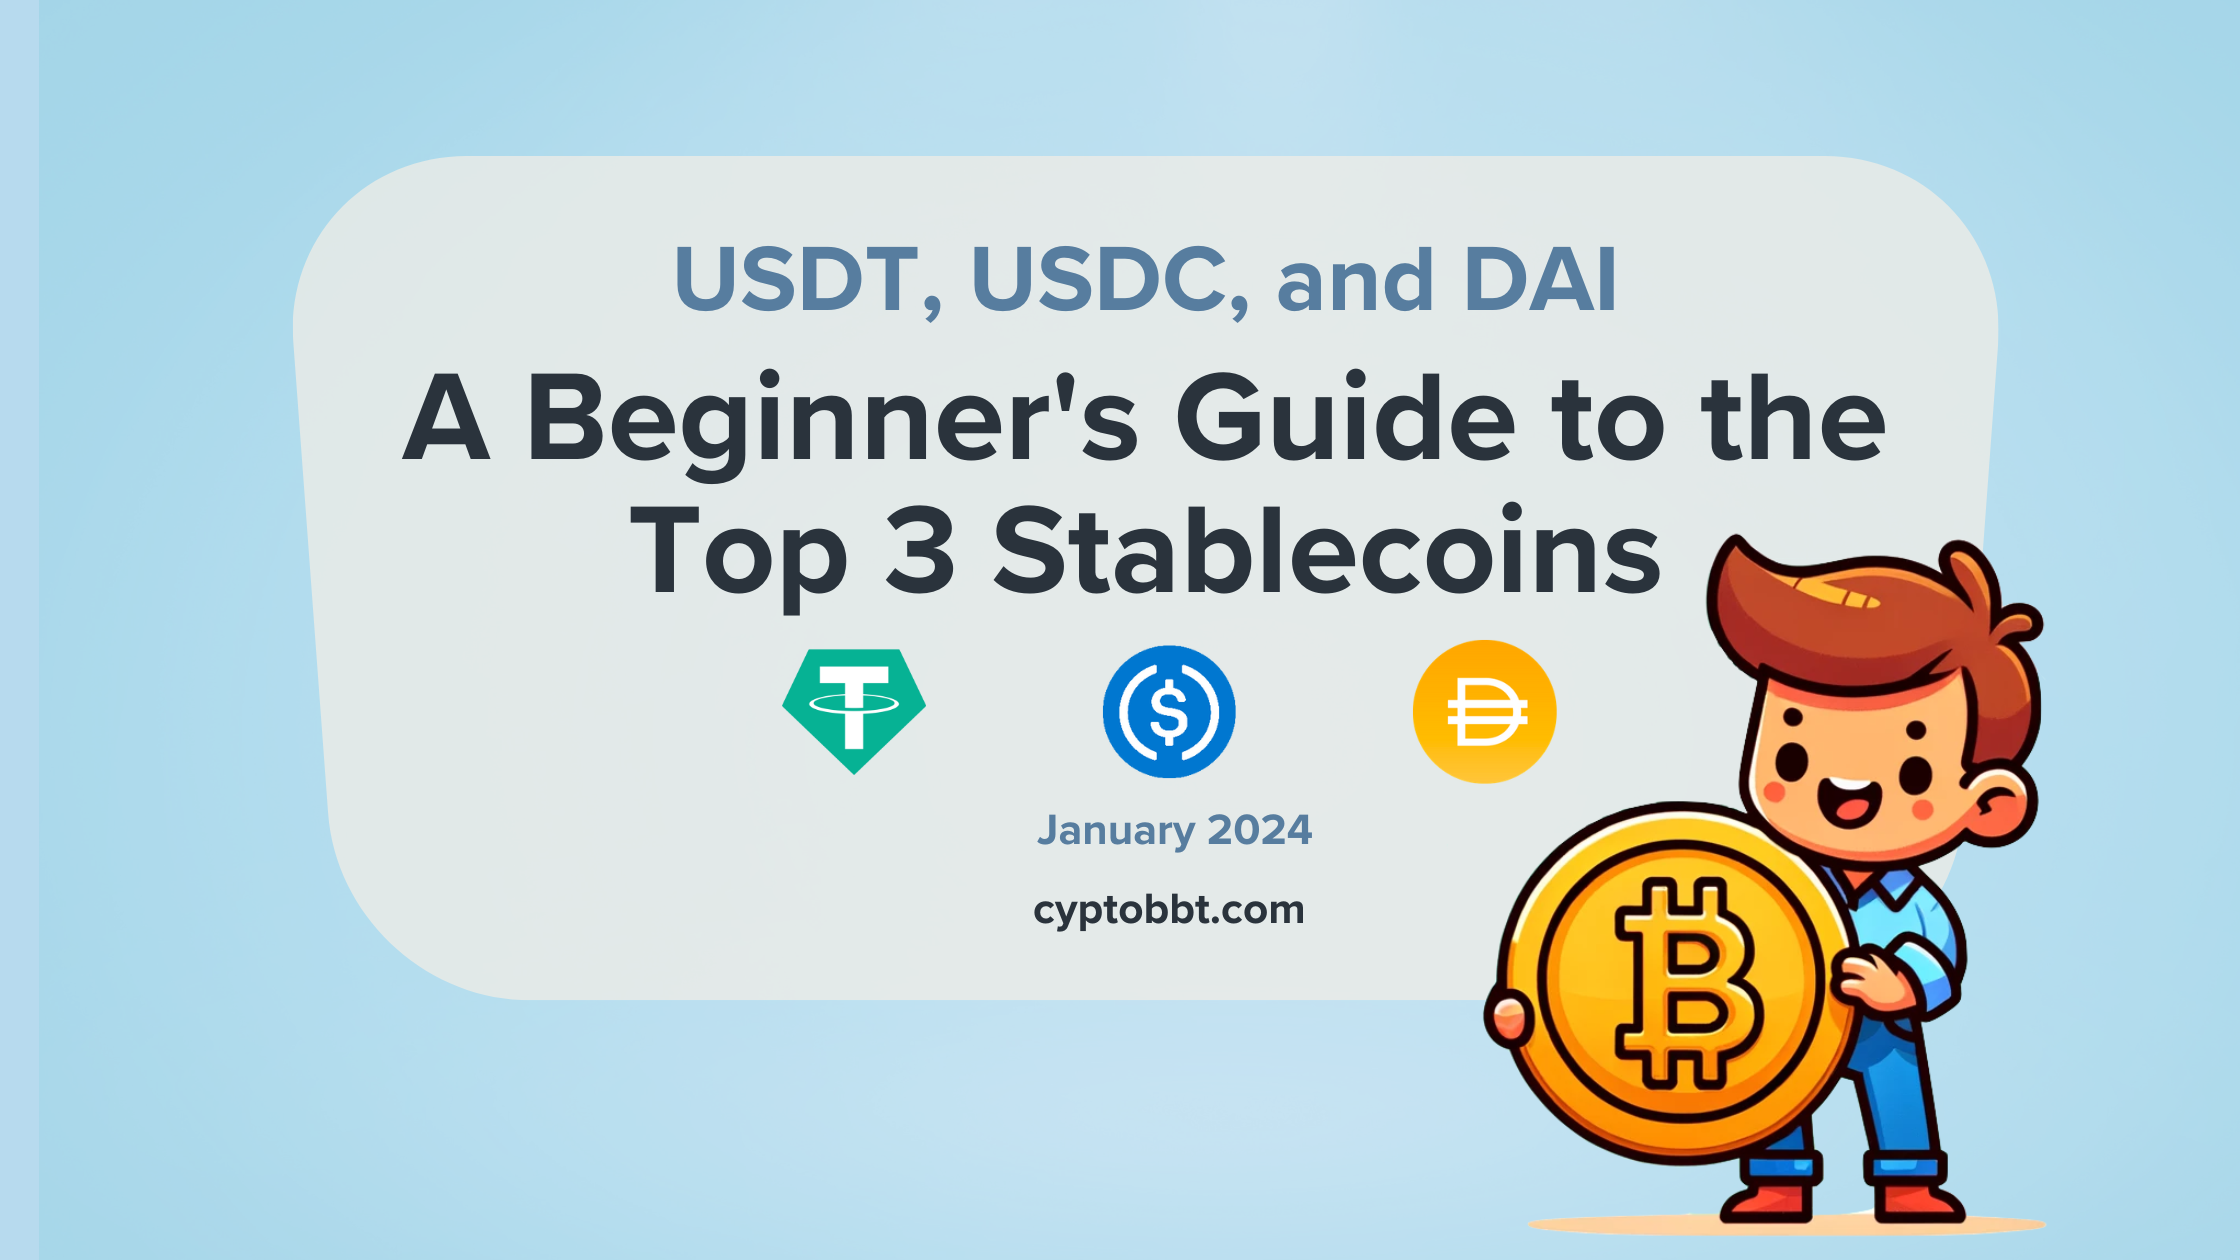 Beginner's Guide to Stablecoins: USDT, USDC, DAI